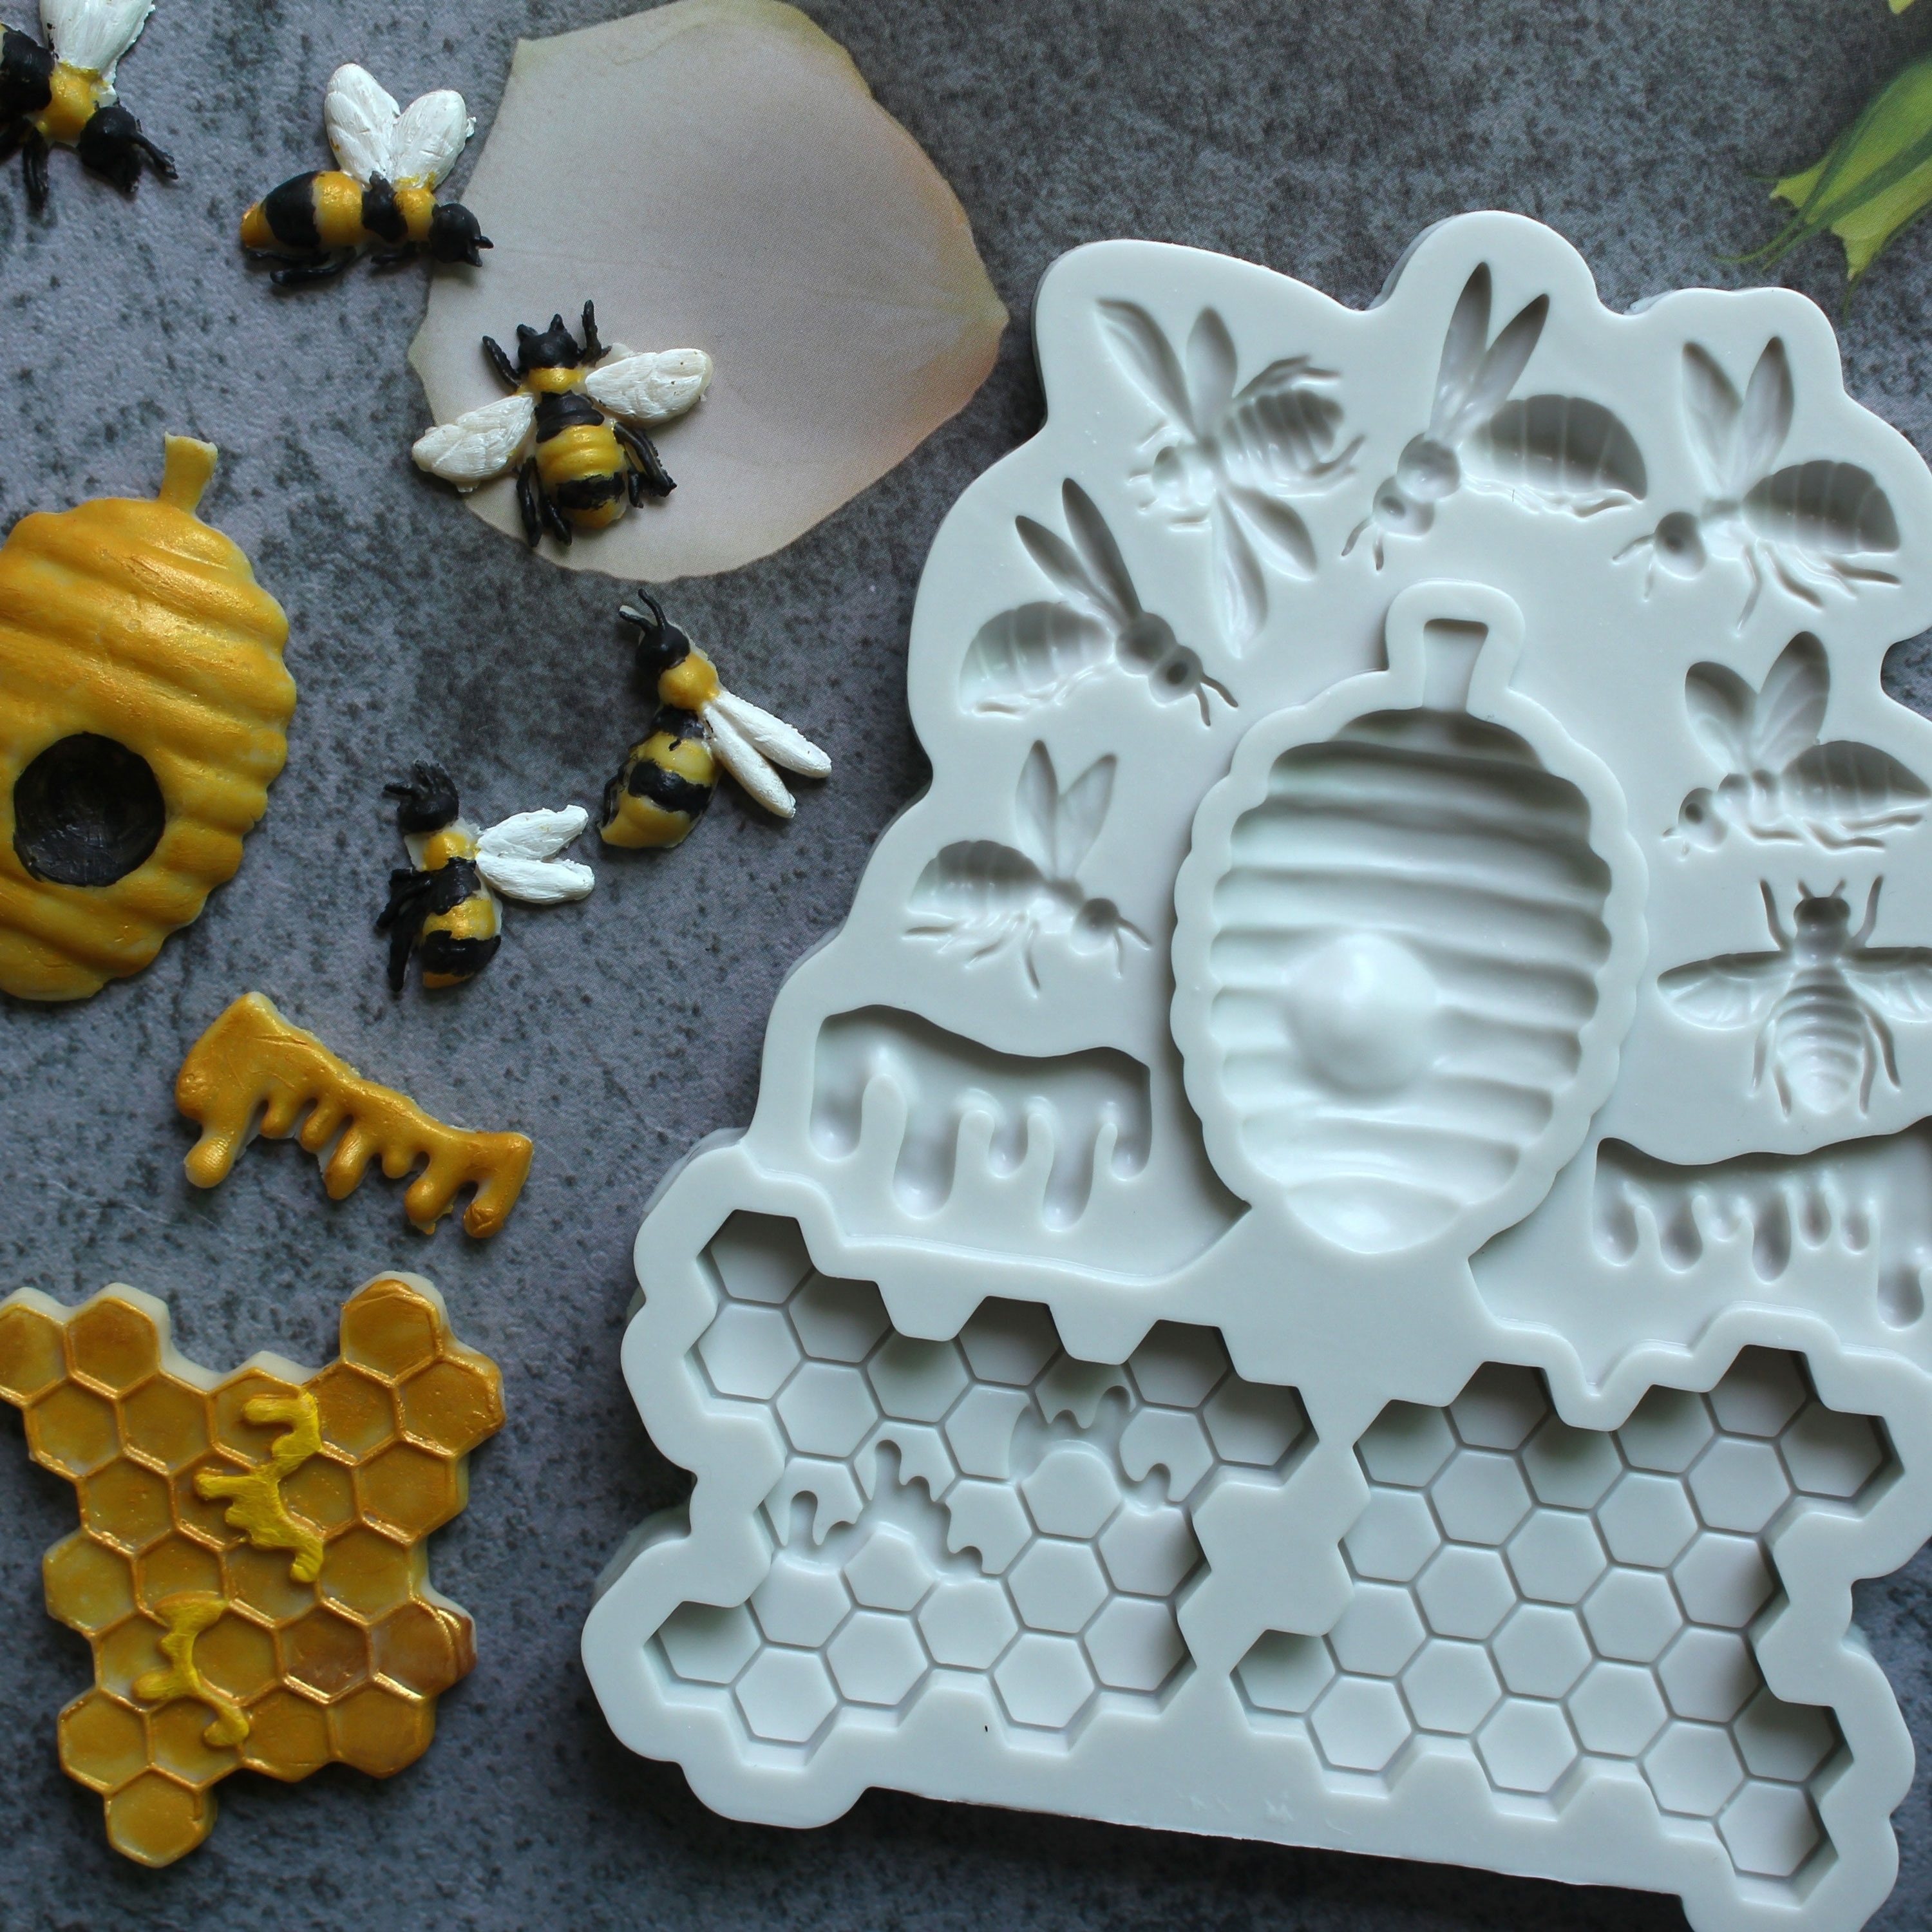 Bee Silicone Molds - Round Honeybee Silicone Molds for Homemade Soaps,  Lotion Bar, Jello, Bath Bomb, Beeswax, Resin, Chocolate and Dessert (Pink)